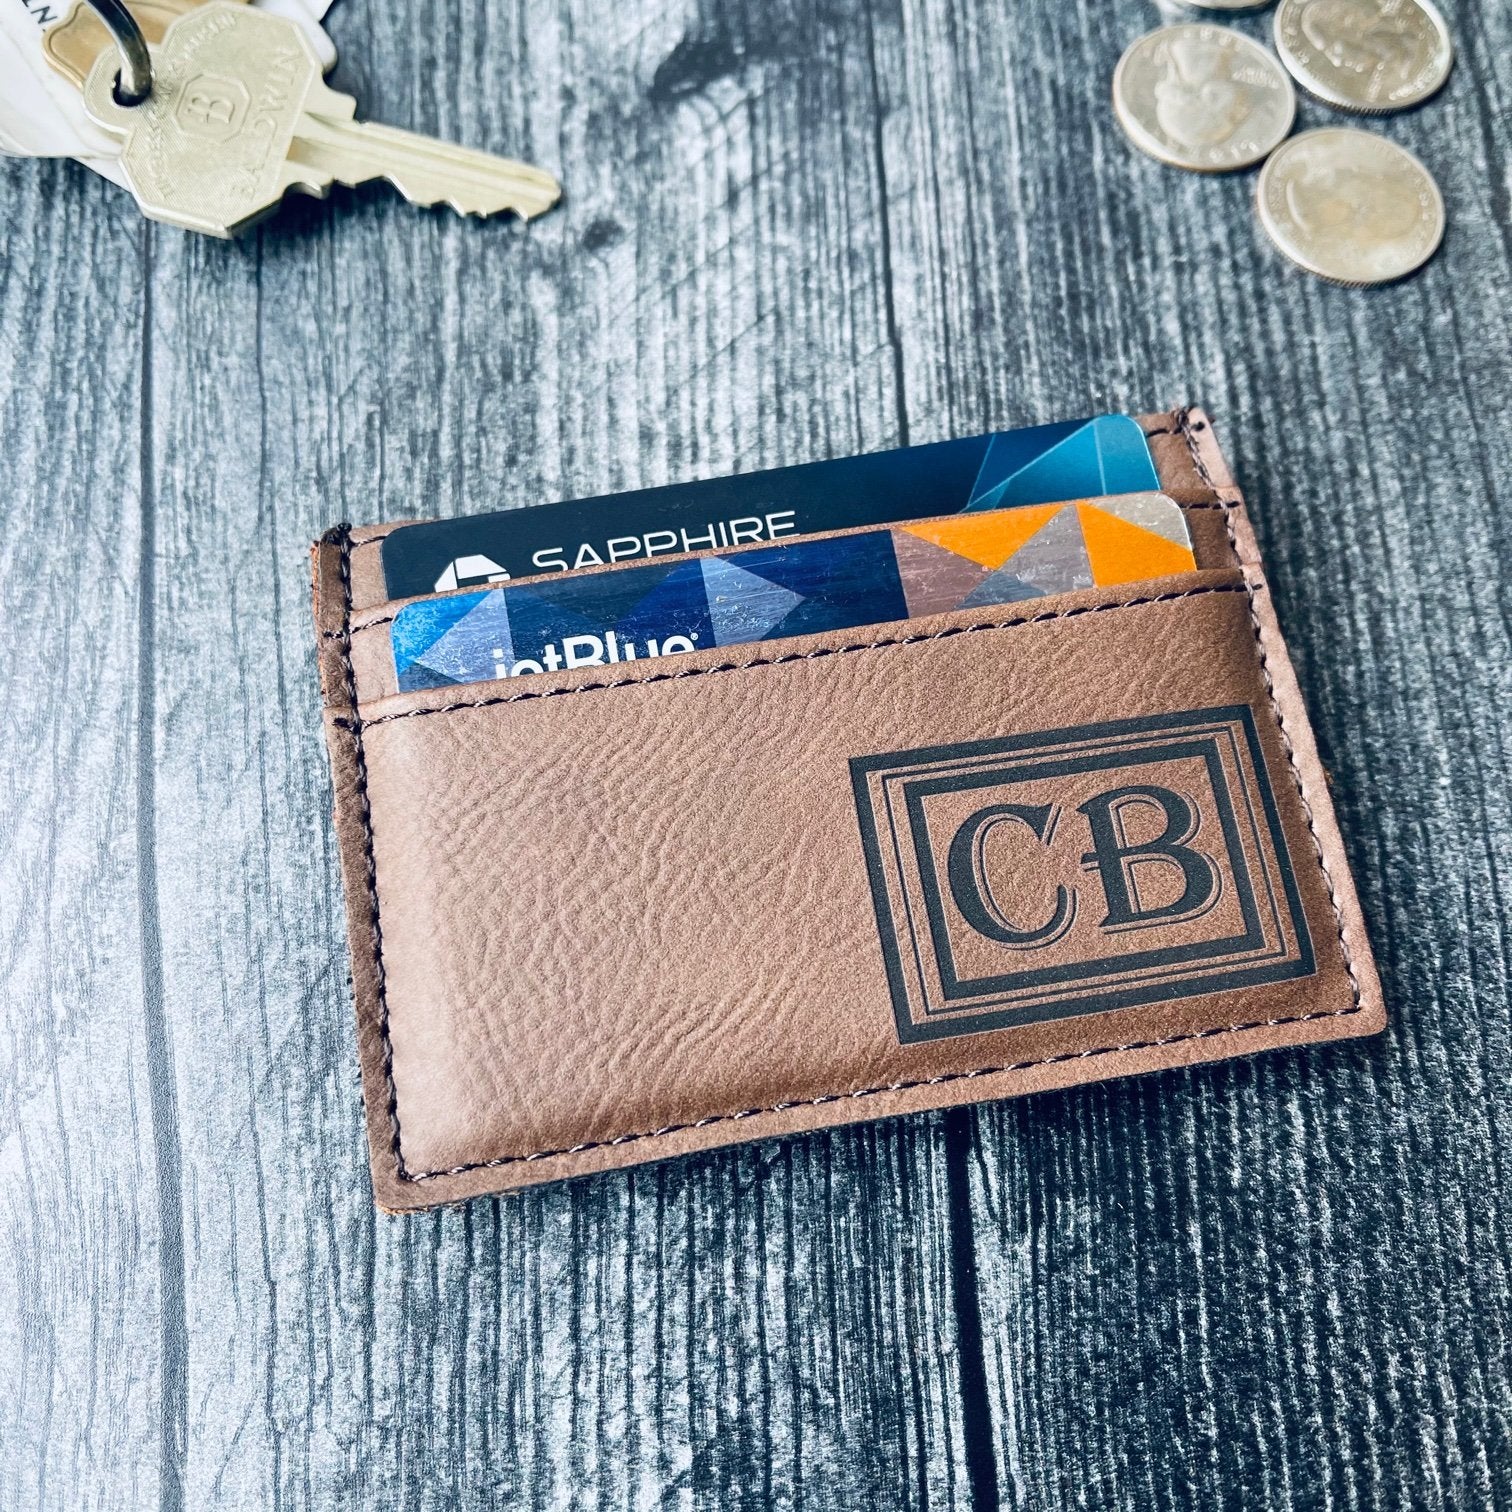 Groovy Guy Gifts Personalized Leather Money Clip Wallet